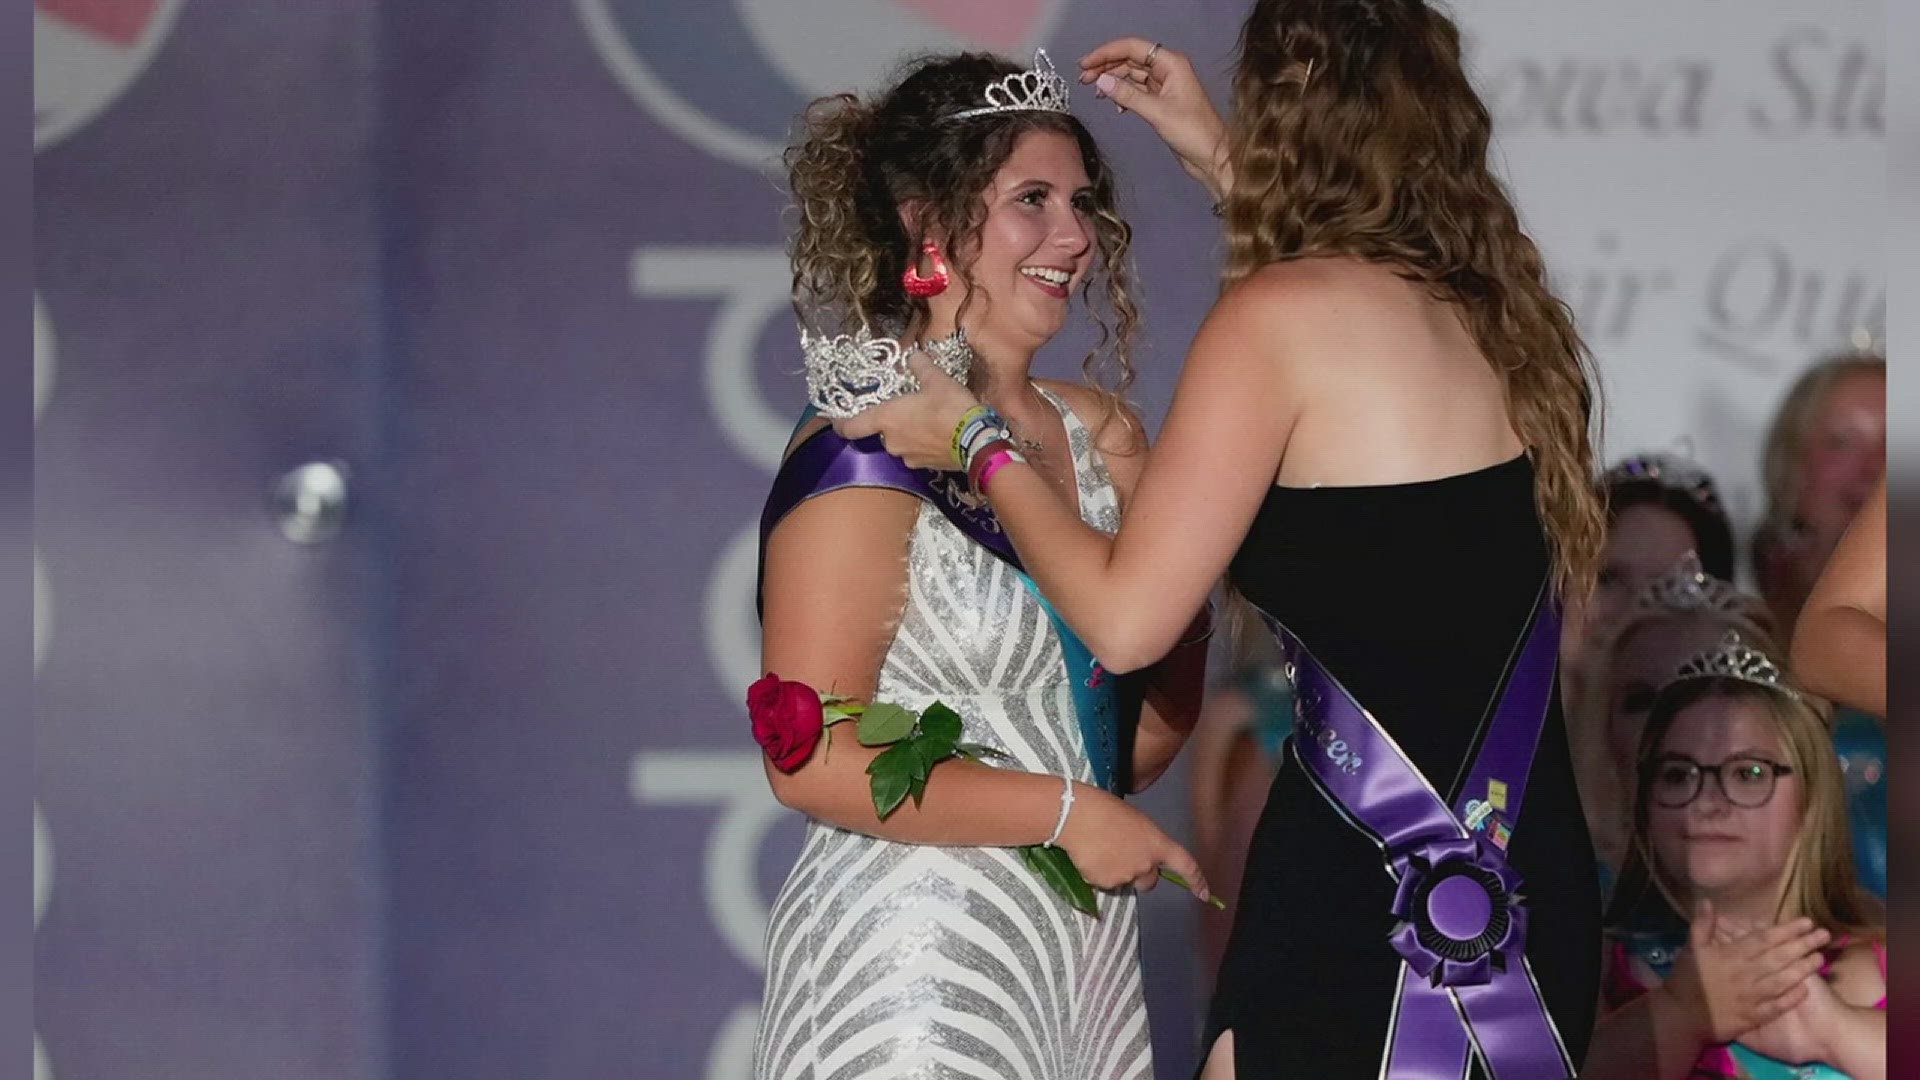 Kalayna Durr from Henry County was crowned the 2023 Iowa State Fair Queen. The first runner-up, Kiley Langley, is from Muscatine.